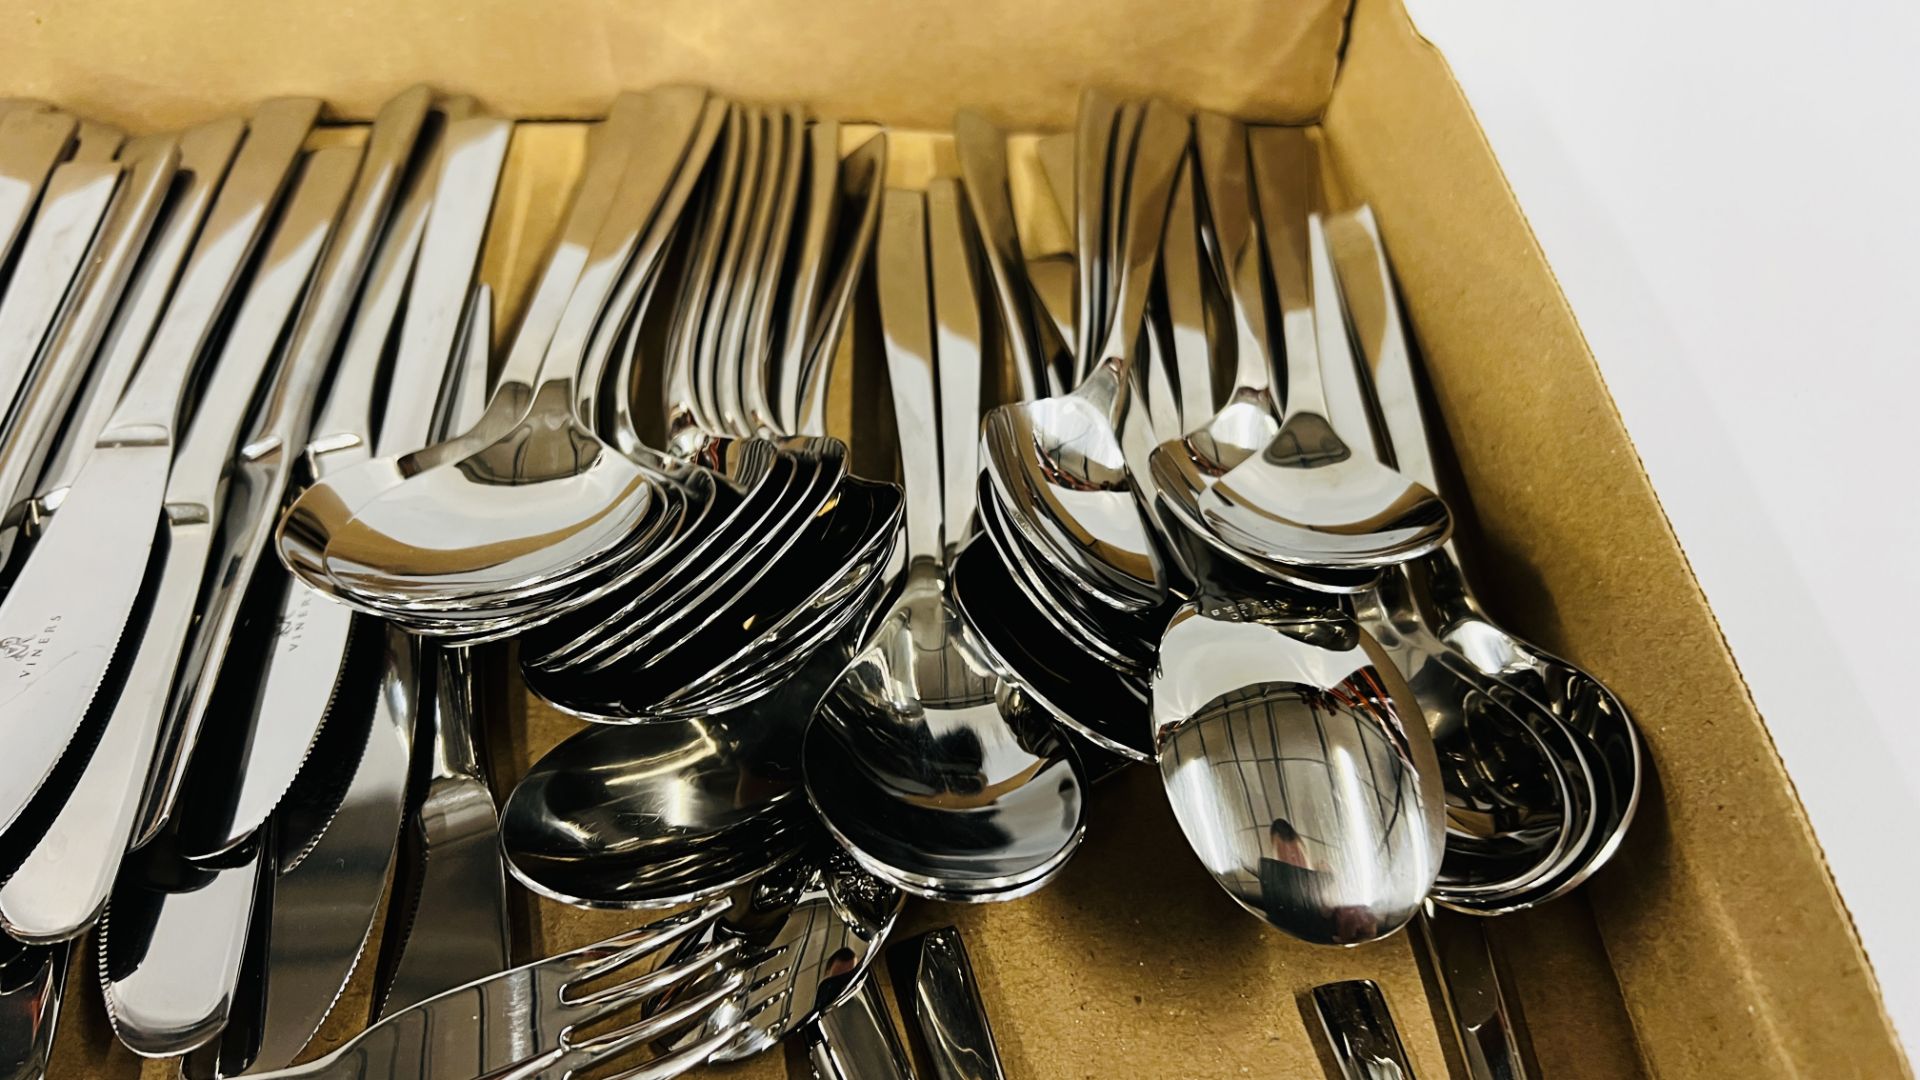 A GOOD QUANTITY OF GOOD QUALITY VINERS CUTLERY. - Image 4 of 4